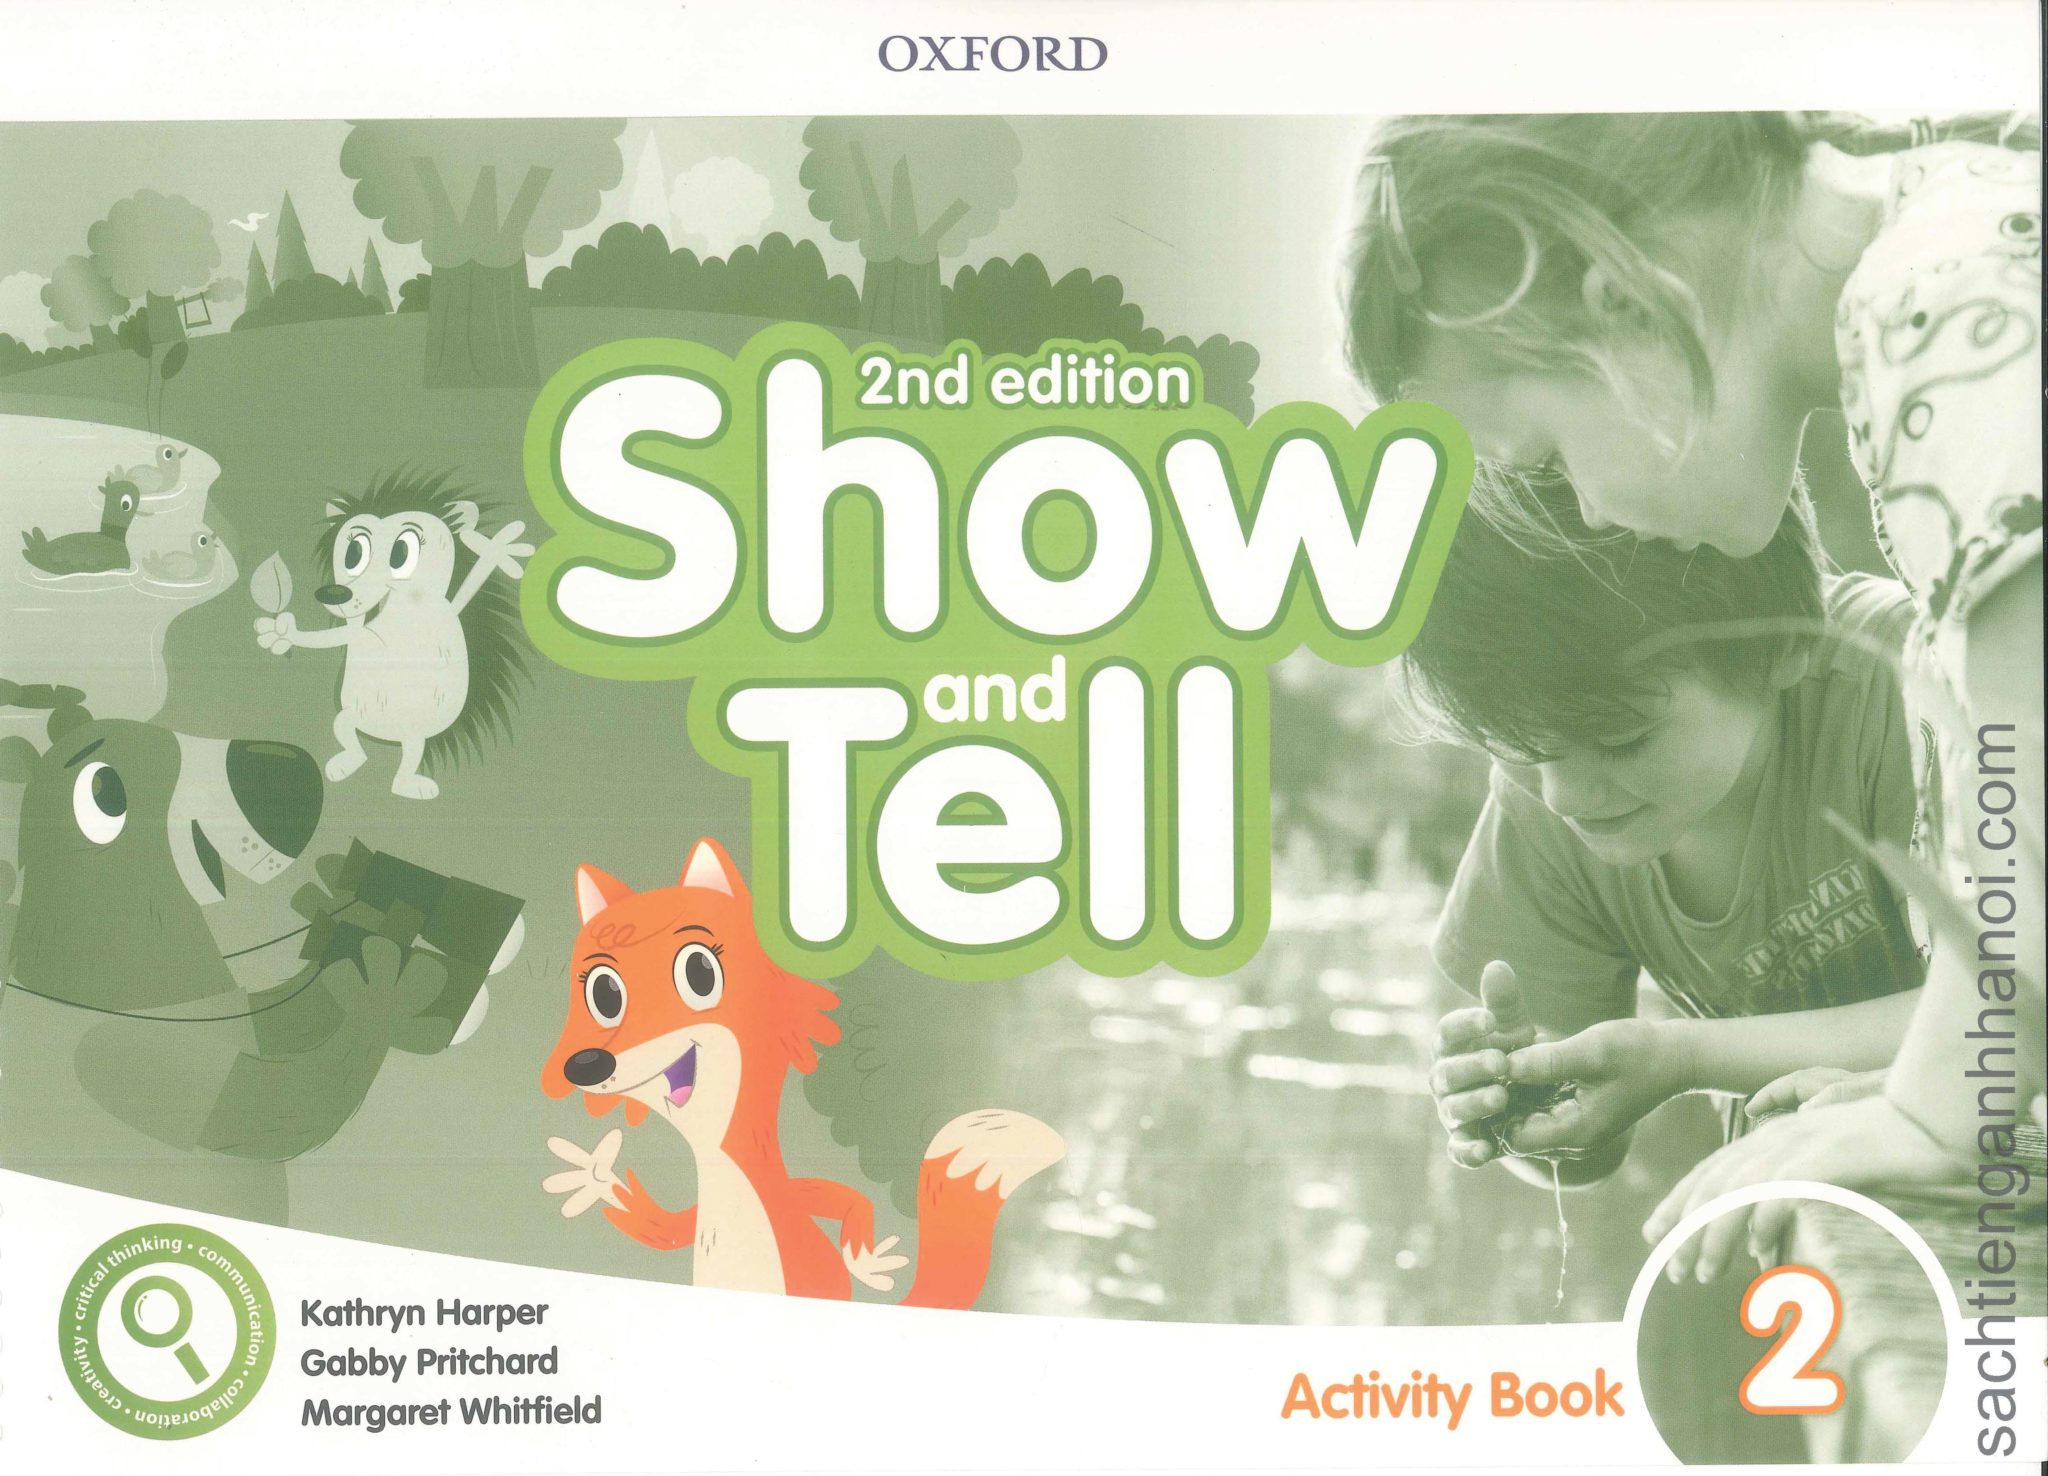 Discover students book. Show and tell 2. Show and tell книга. Show and tell activity book. Show and tell 1 Oxford.